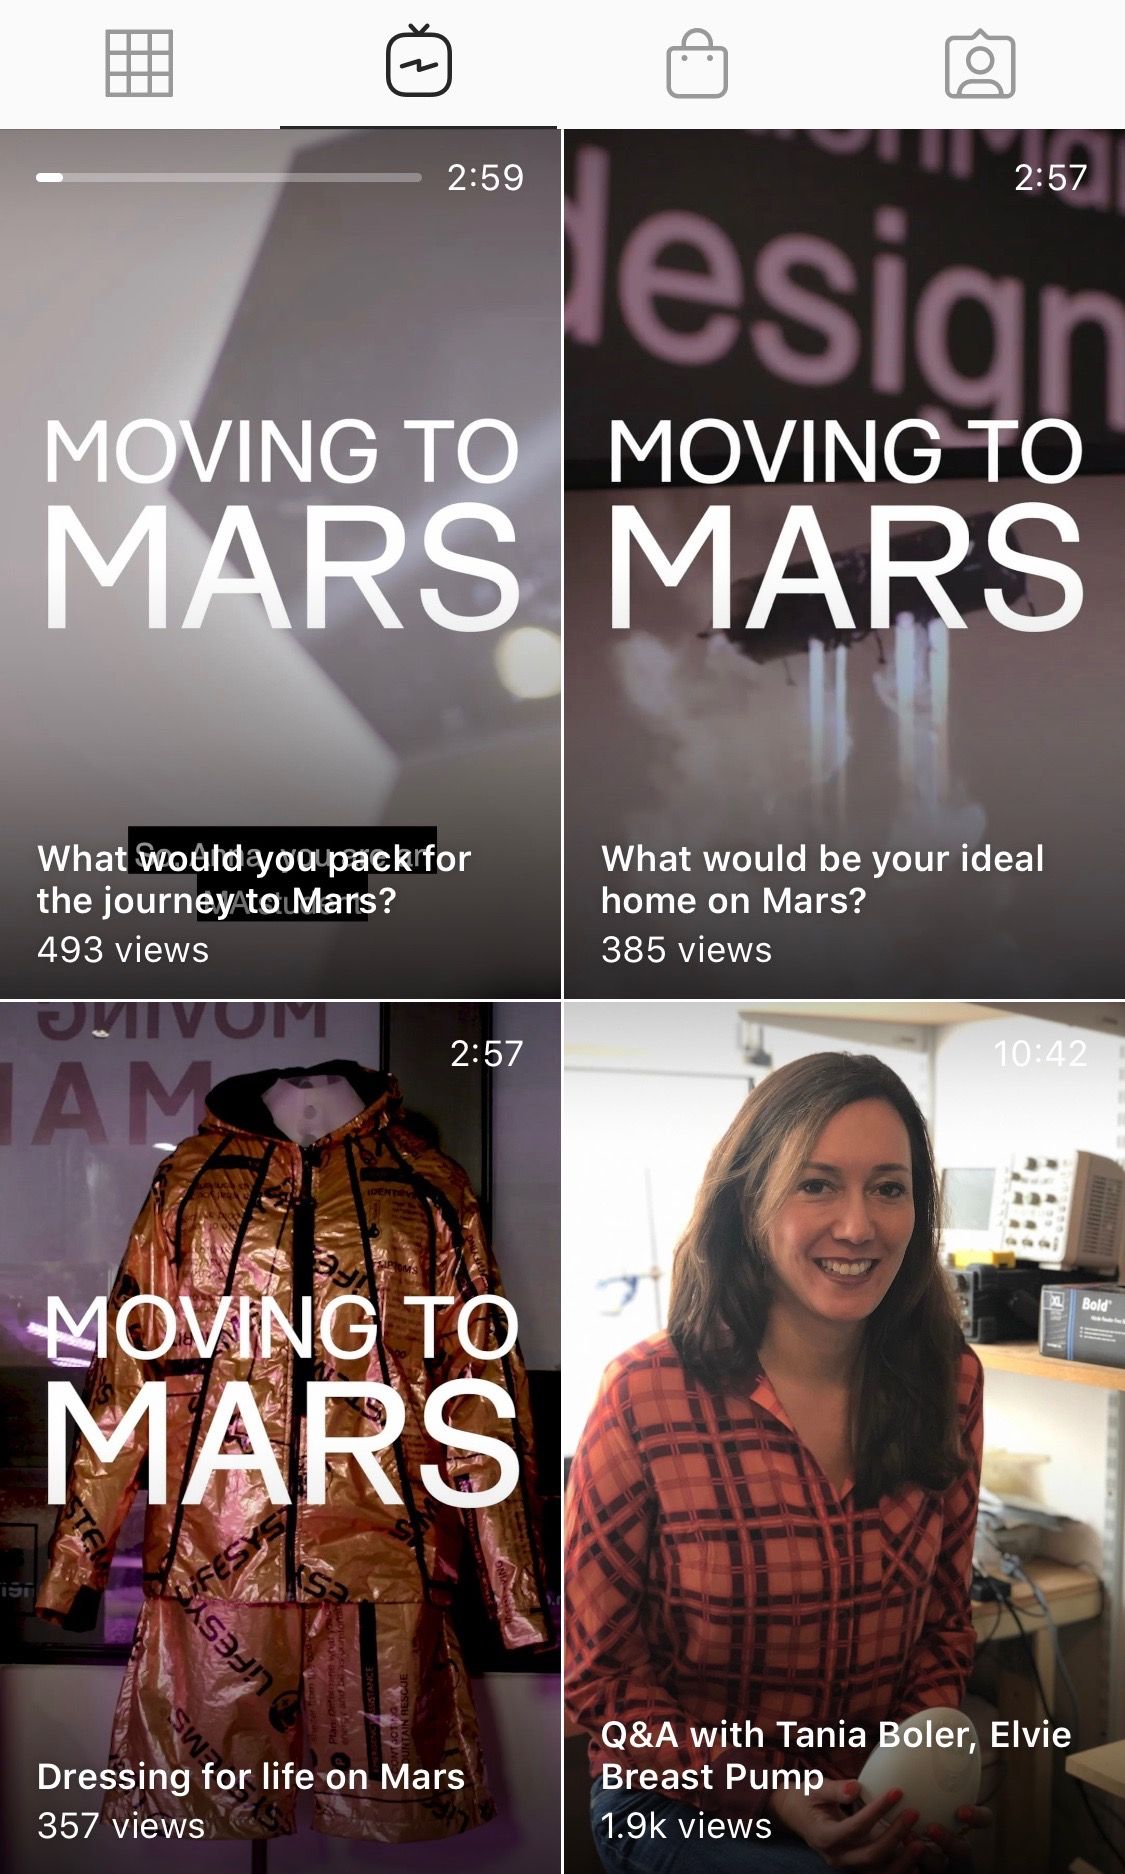 ‘Moving To Mars’ content featured on Instagram's IGTV by @designmuseum